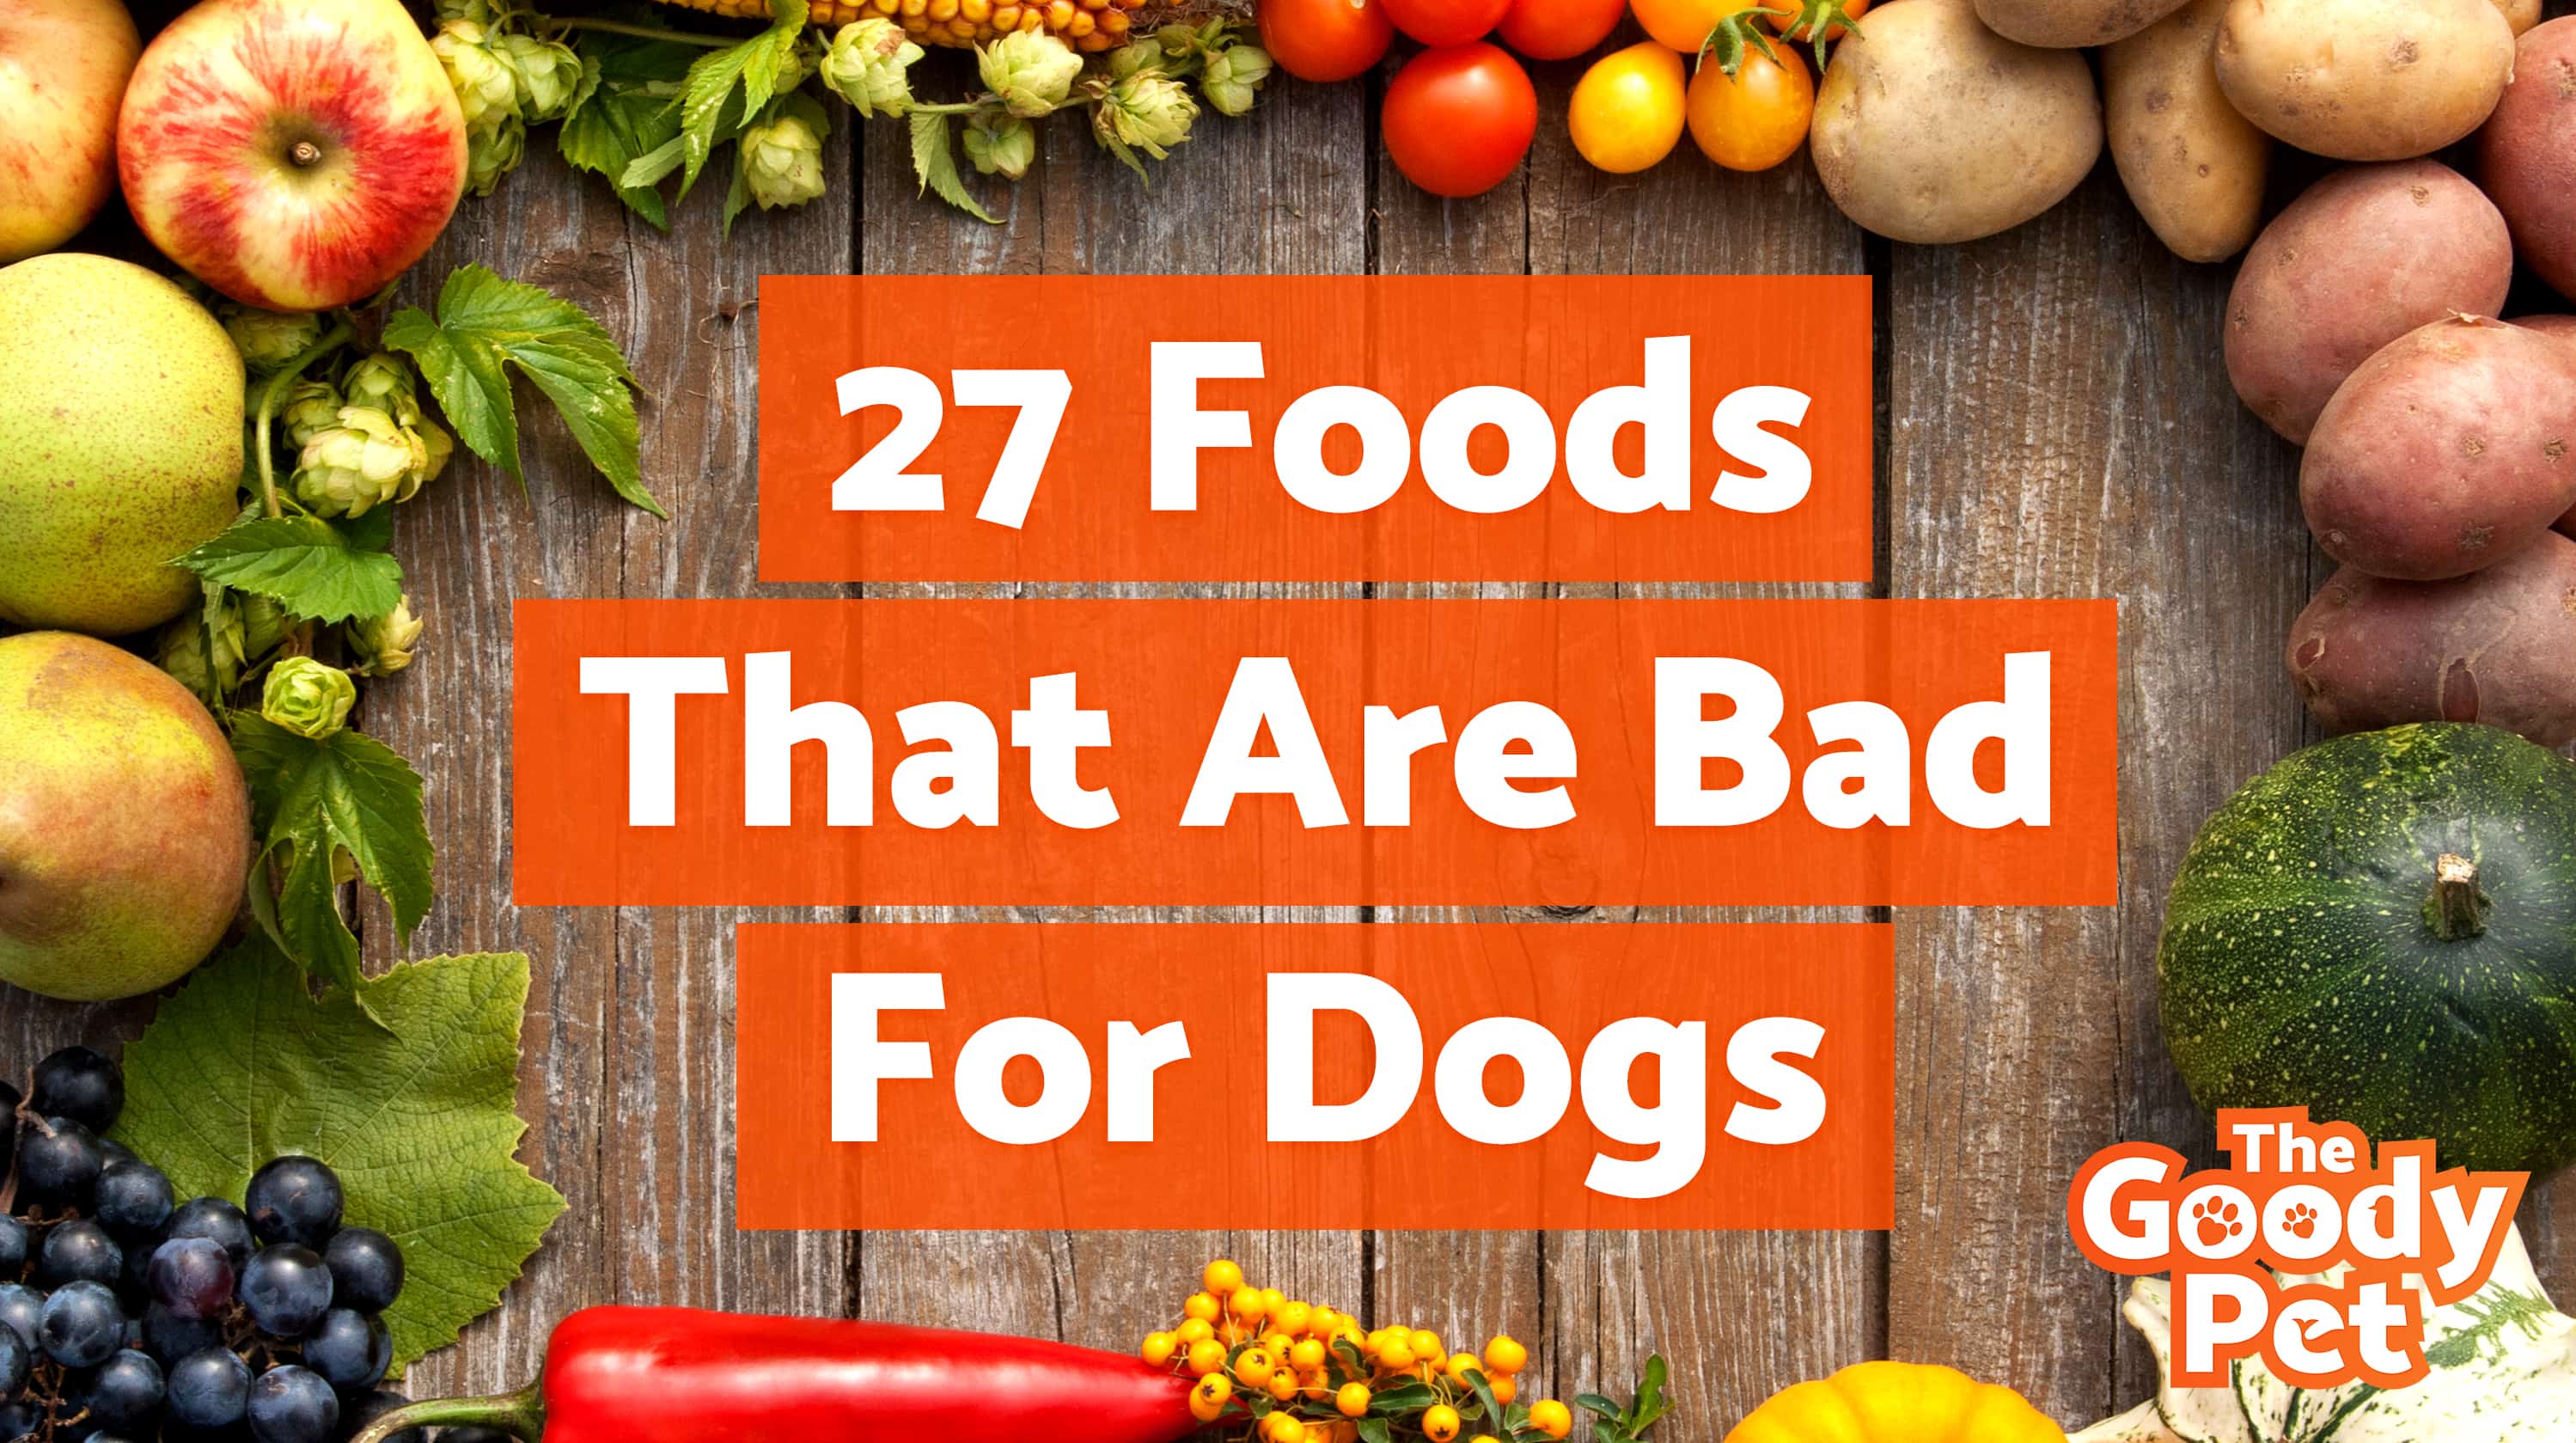 The 27 Worst Foods That Are Bad For Dogs (Warning Toxic!) TheGoodyPet